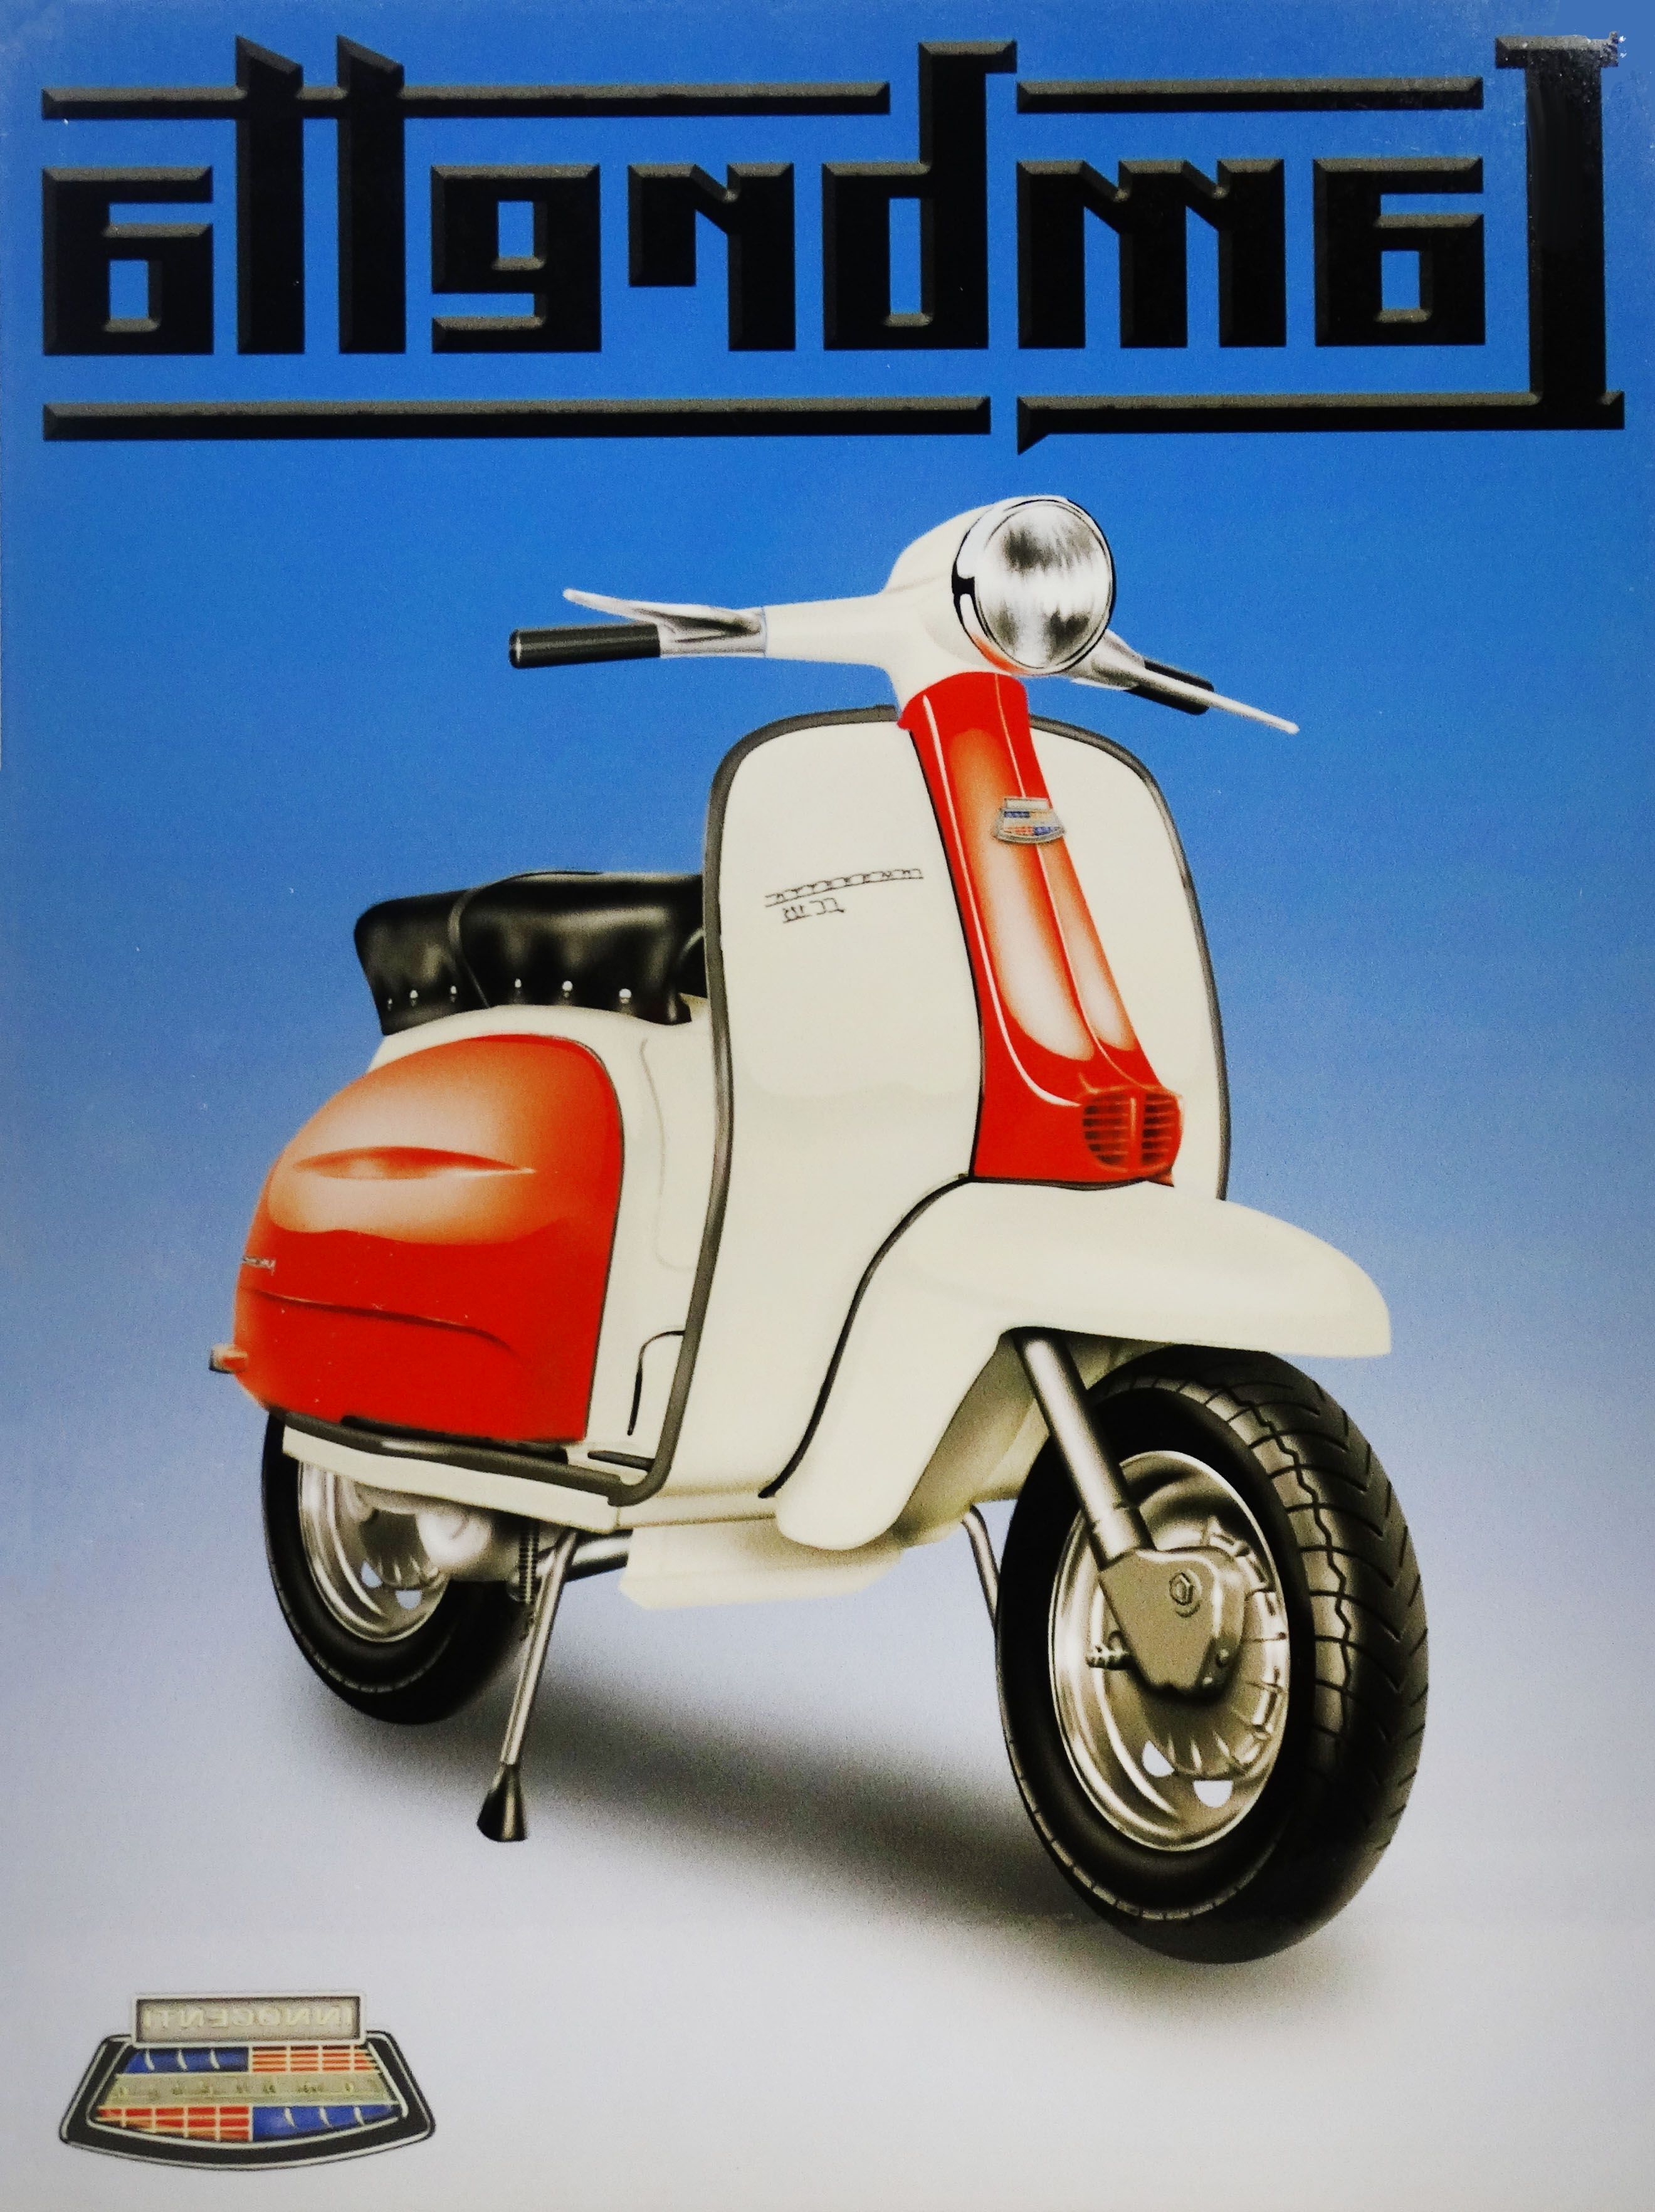 Vespa 3d Wall Art Pertaining To Famous Lambretta Scooters Perfect For Touring Europe (View 7 of 15)